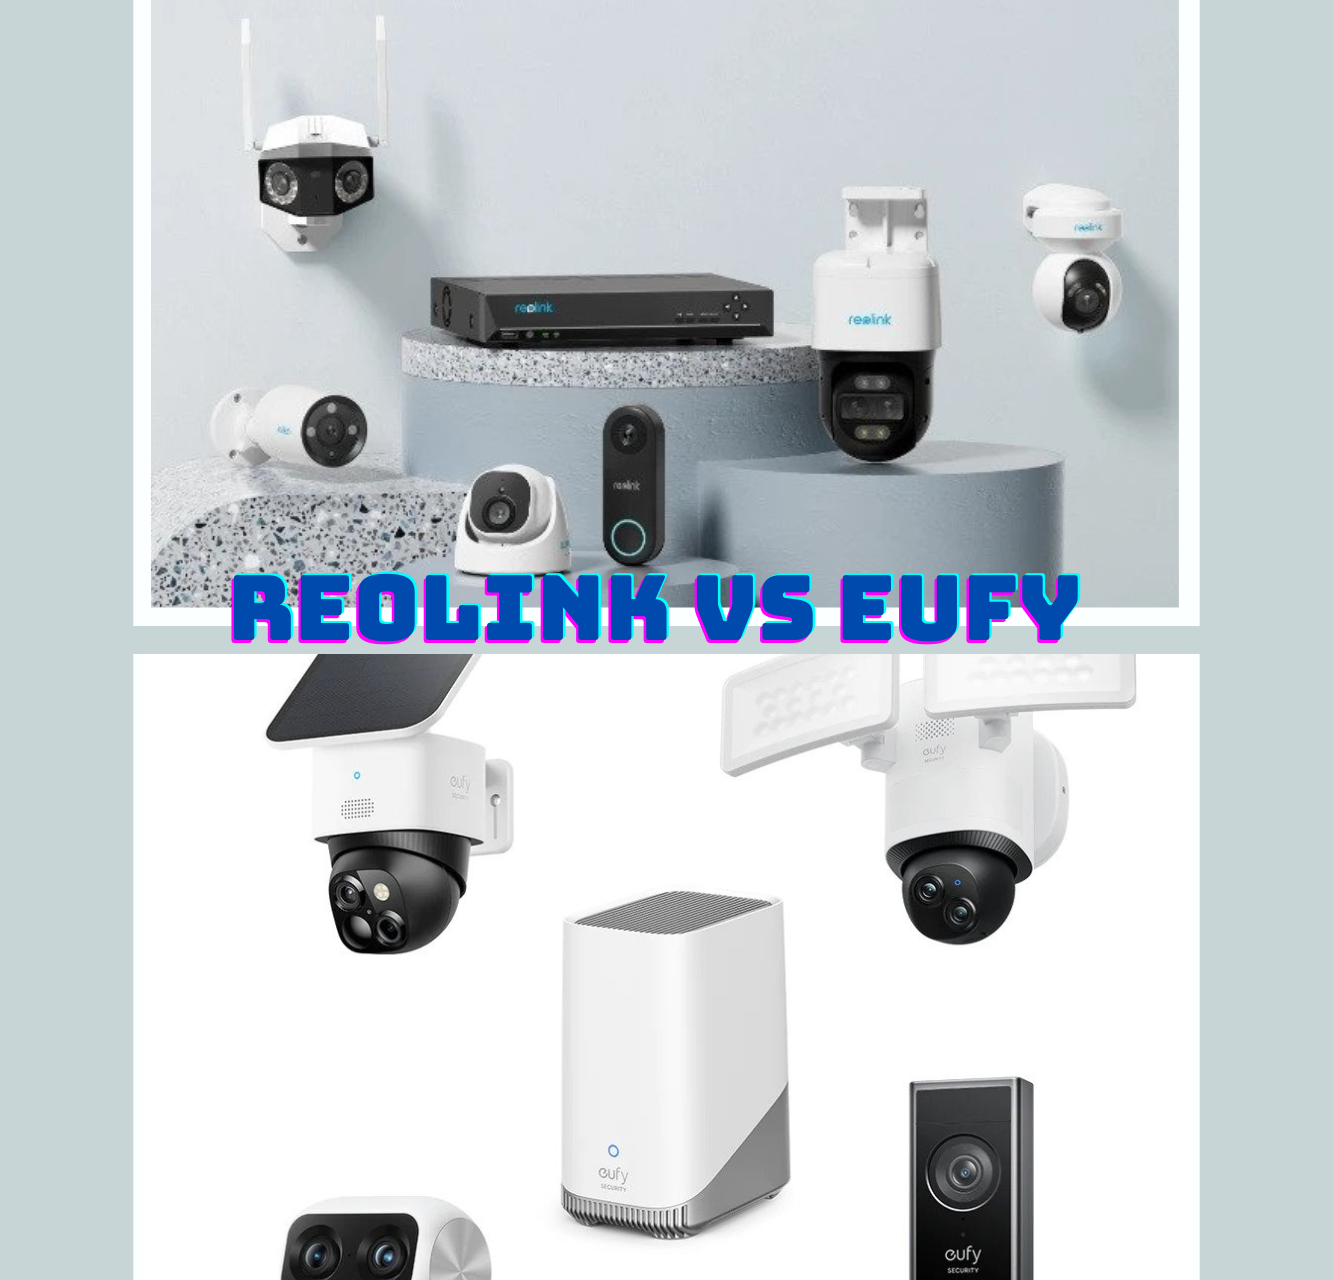 Reolink vs Eufy security system